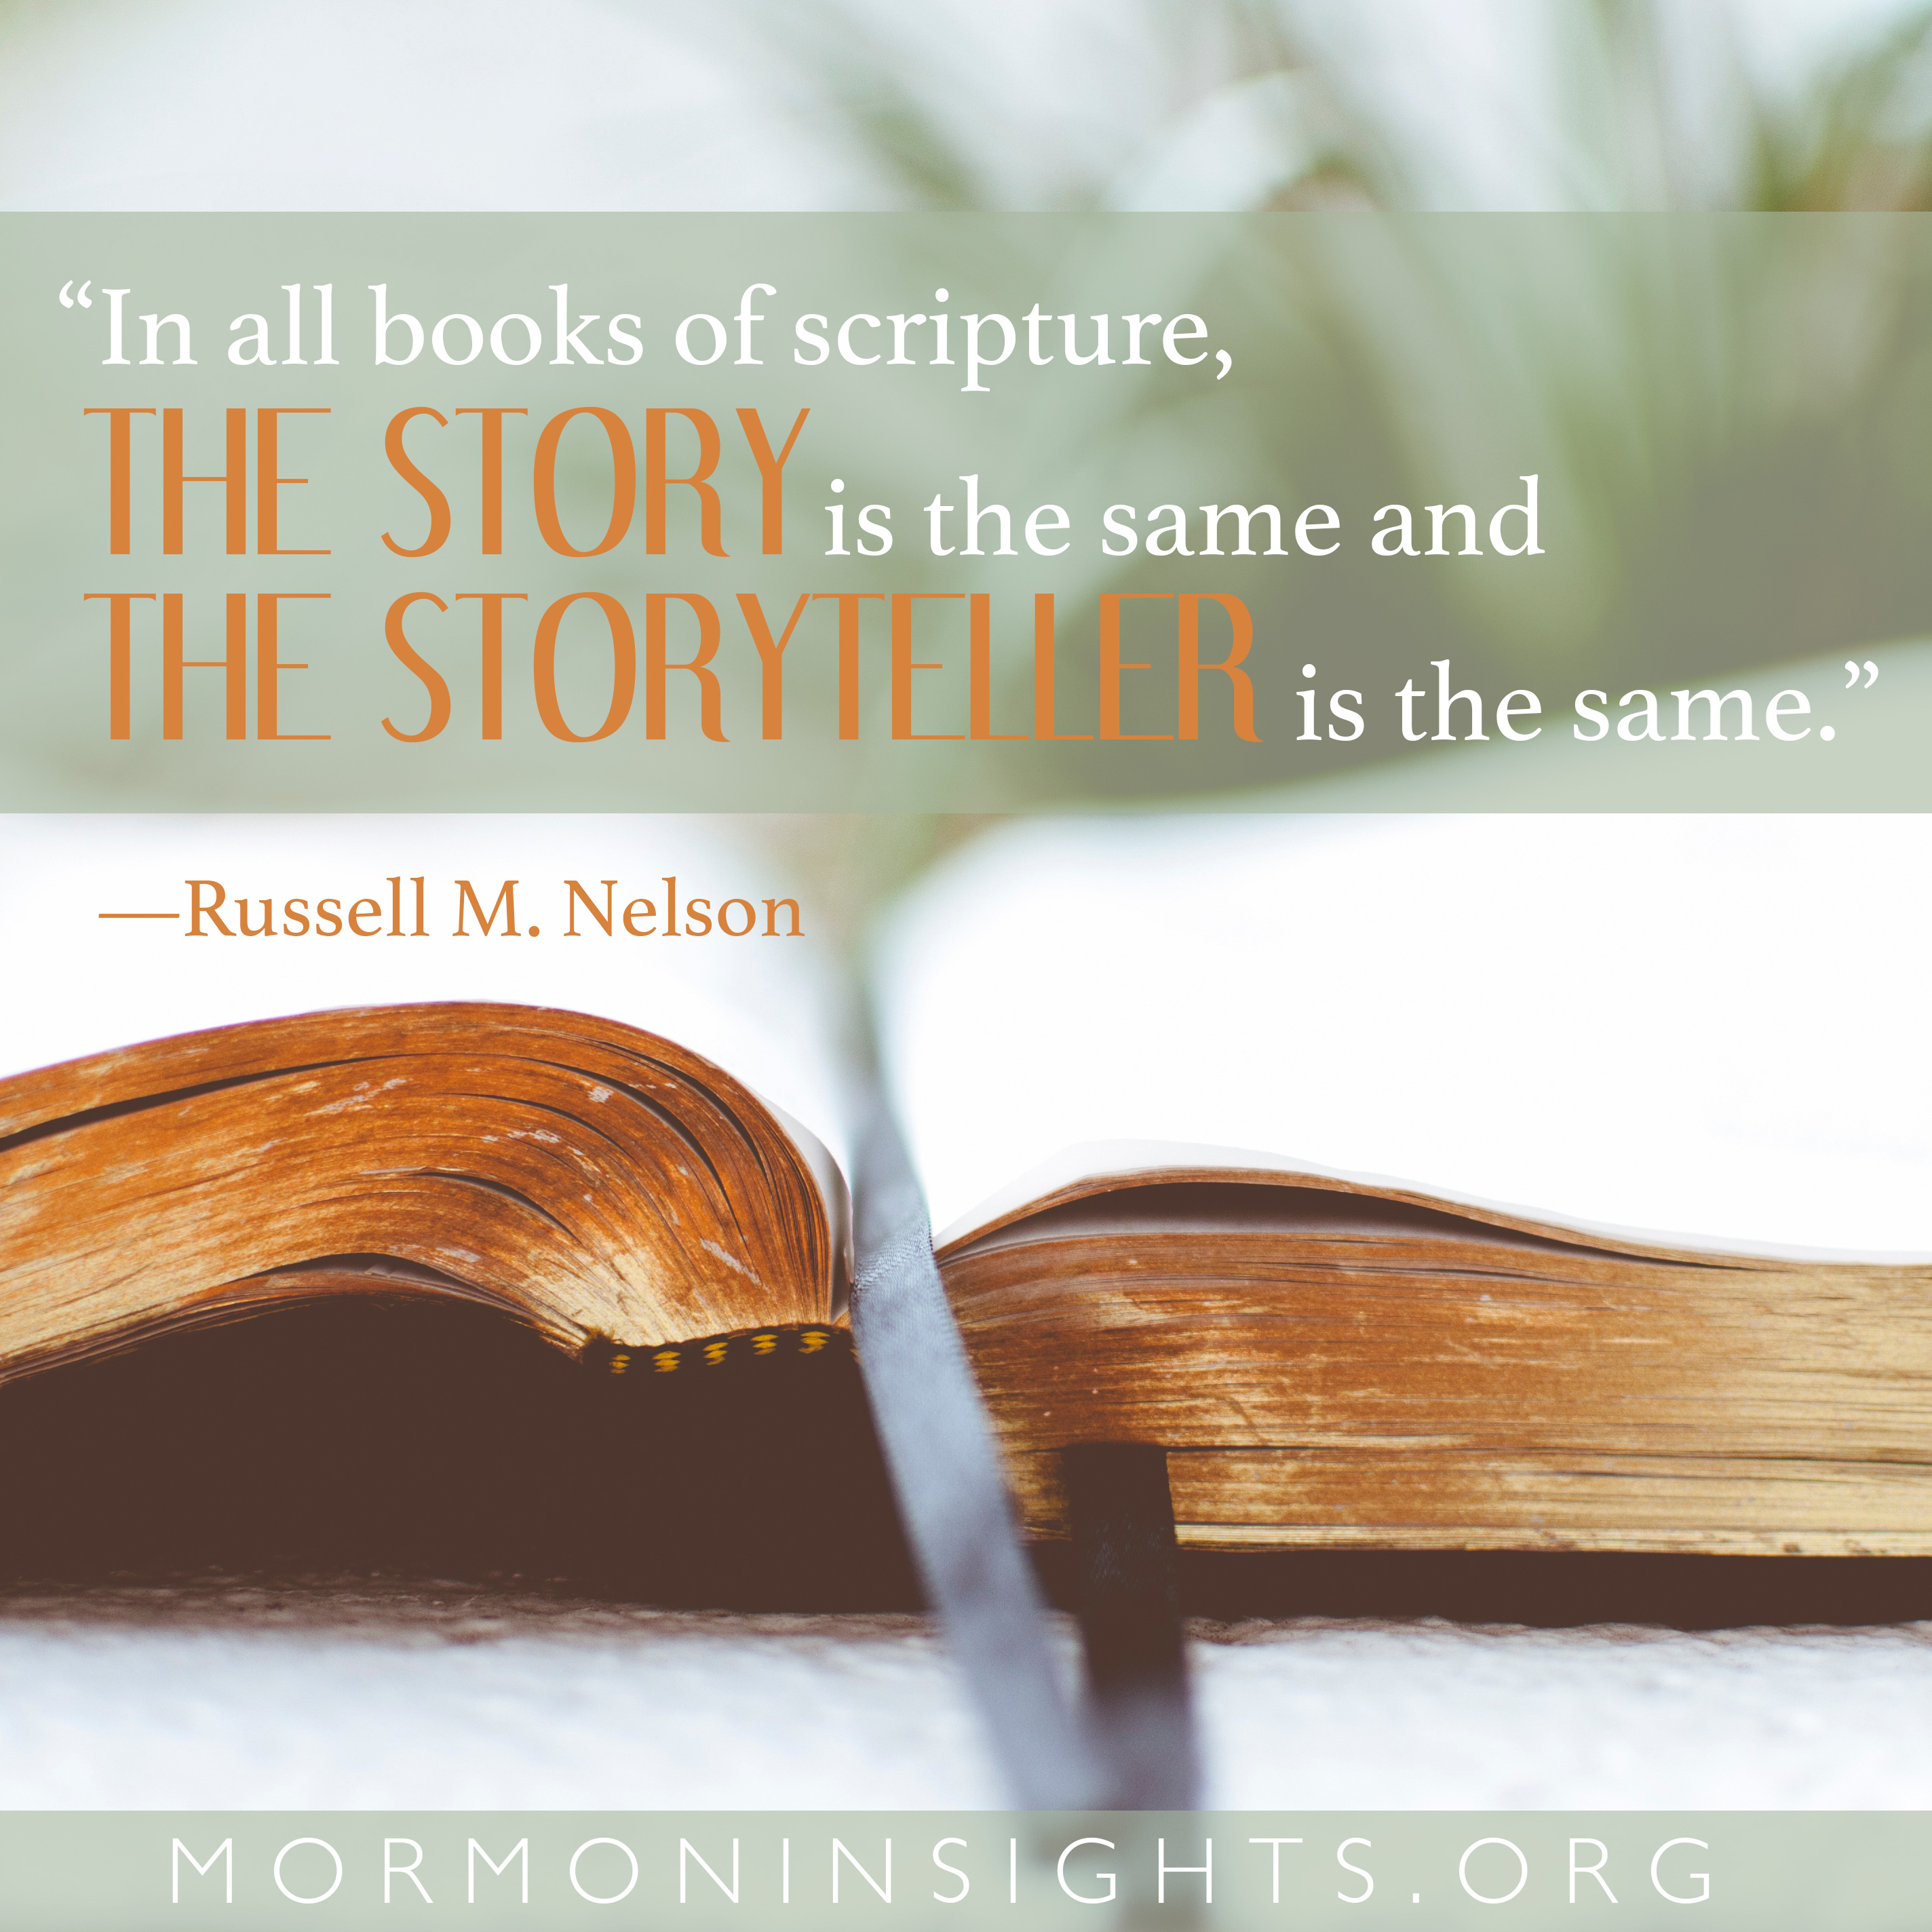 "In all books of scripture, the story is the same and the storyteller is the same." -Russell M. Nelson